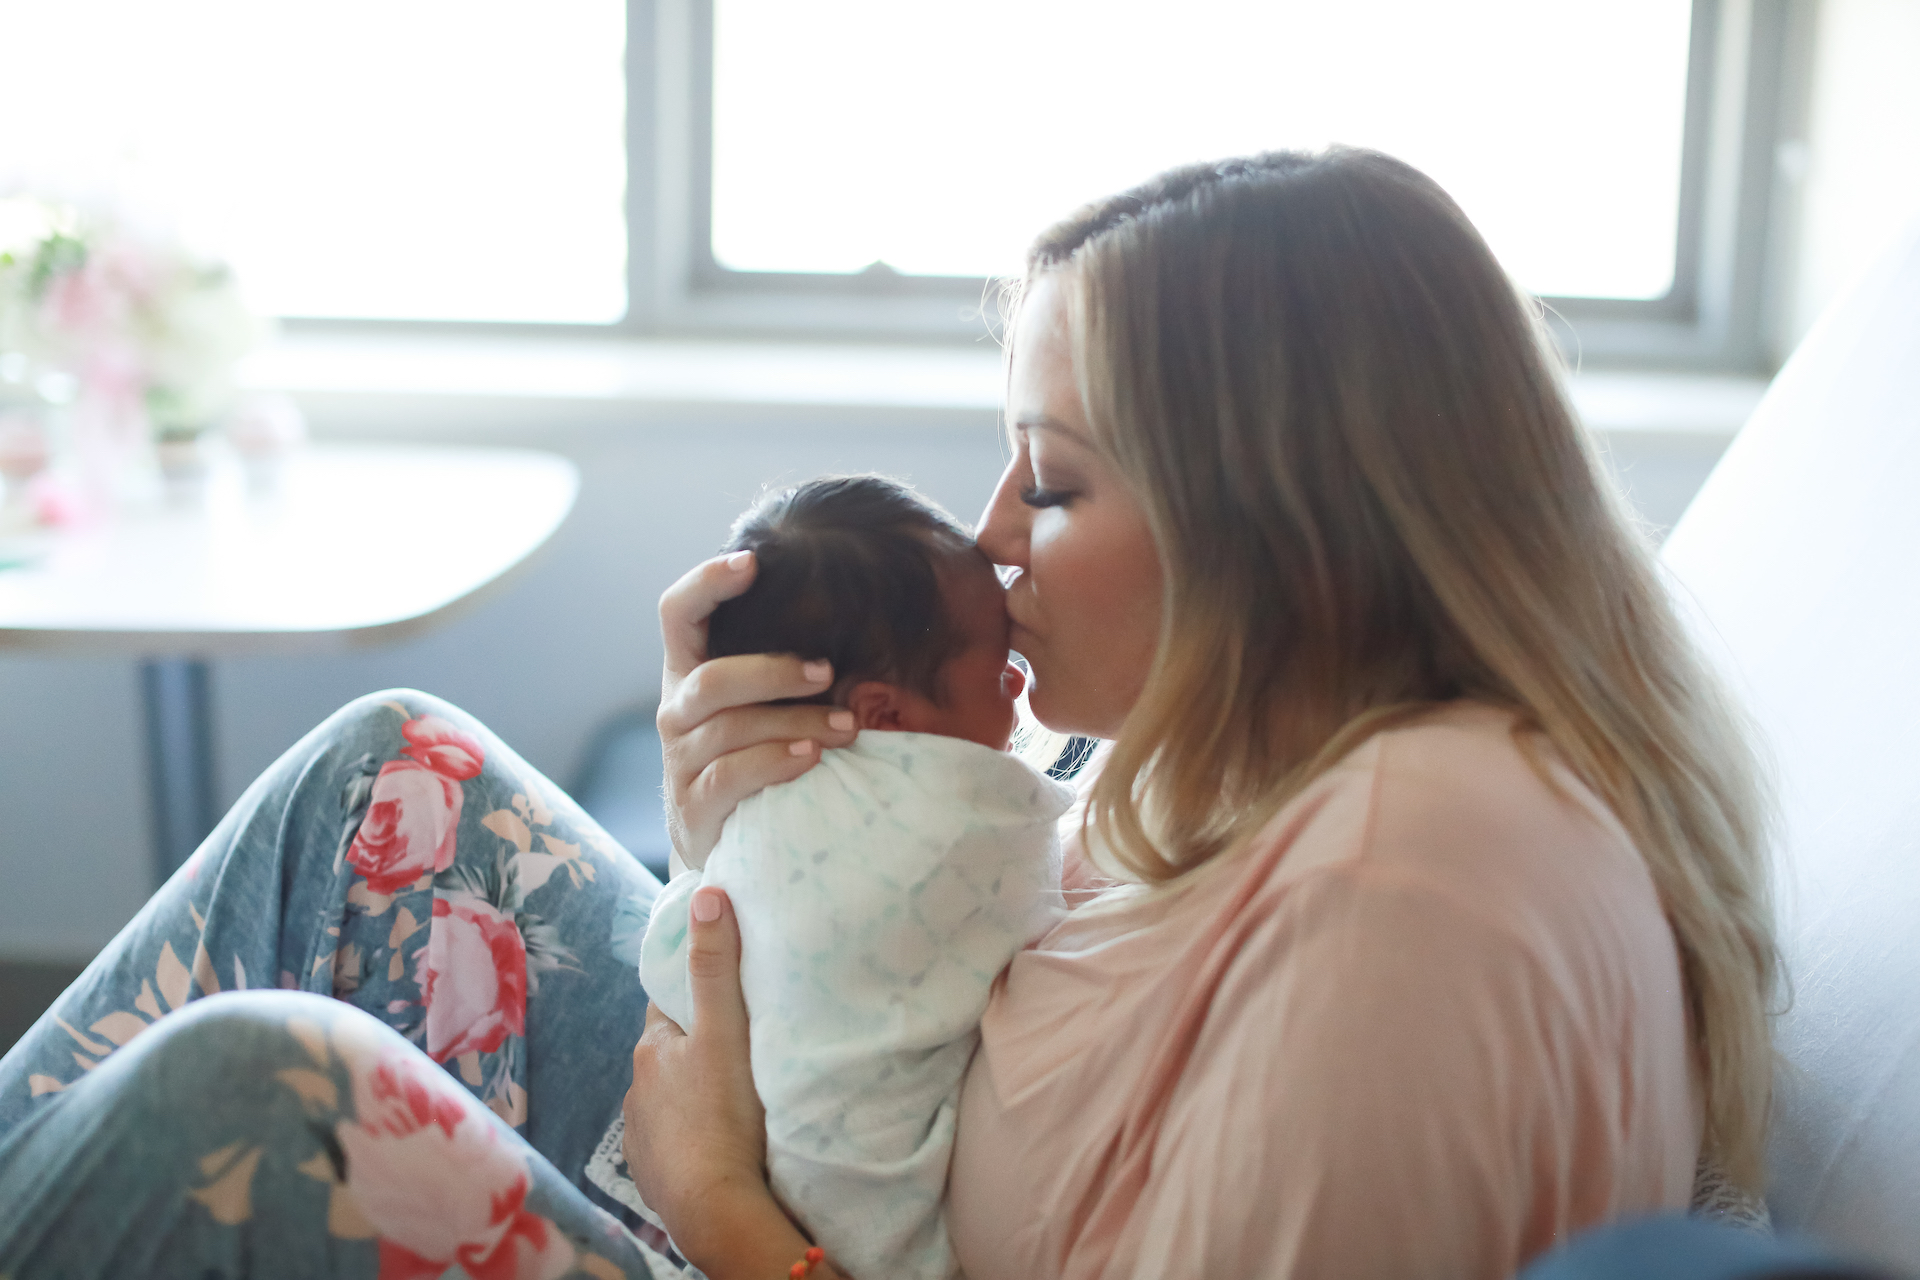 Find 10 tips for bonding with donor egg baby in this blog by mother via egg donation, Victoria!